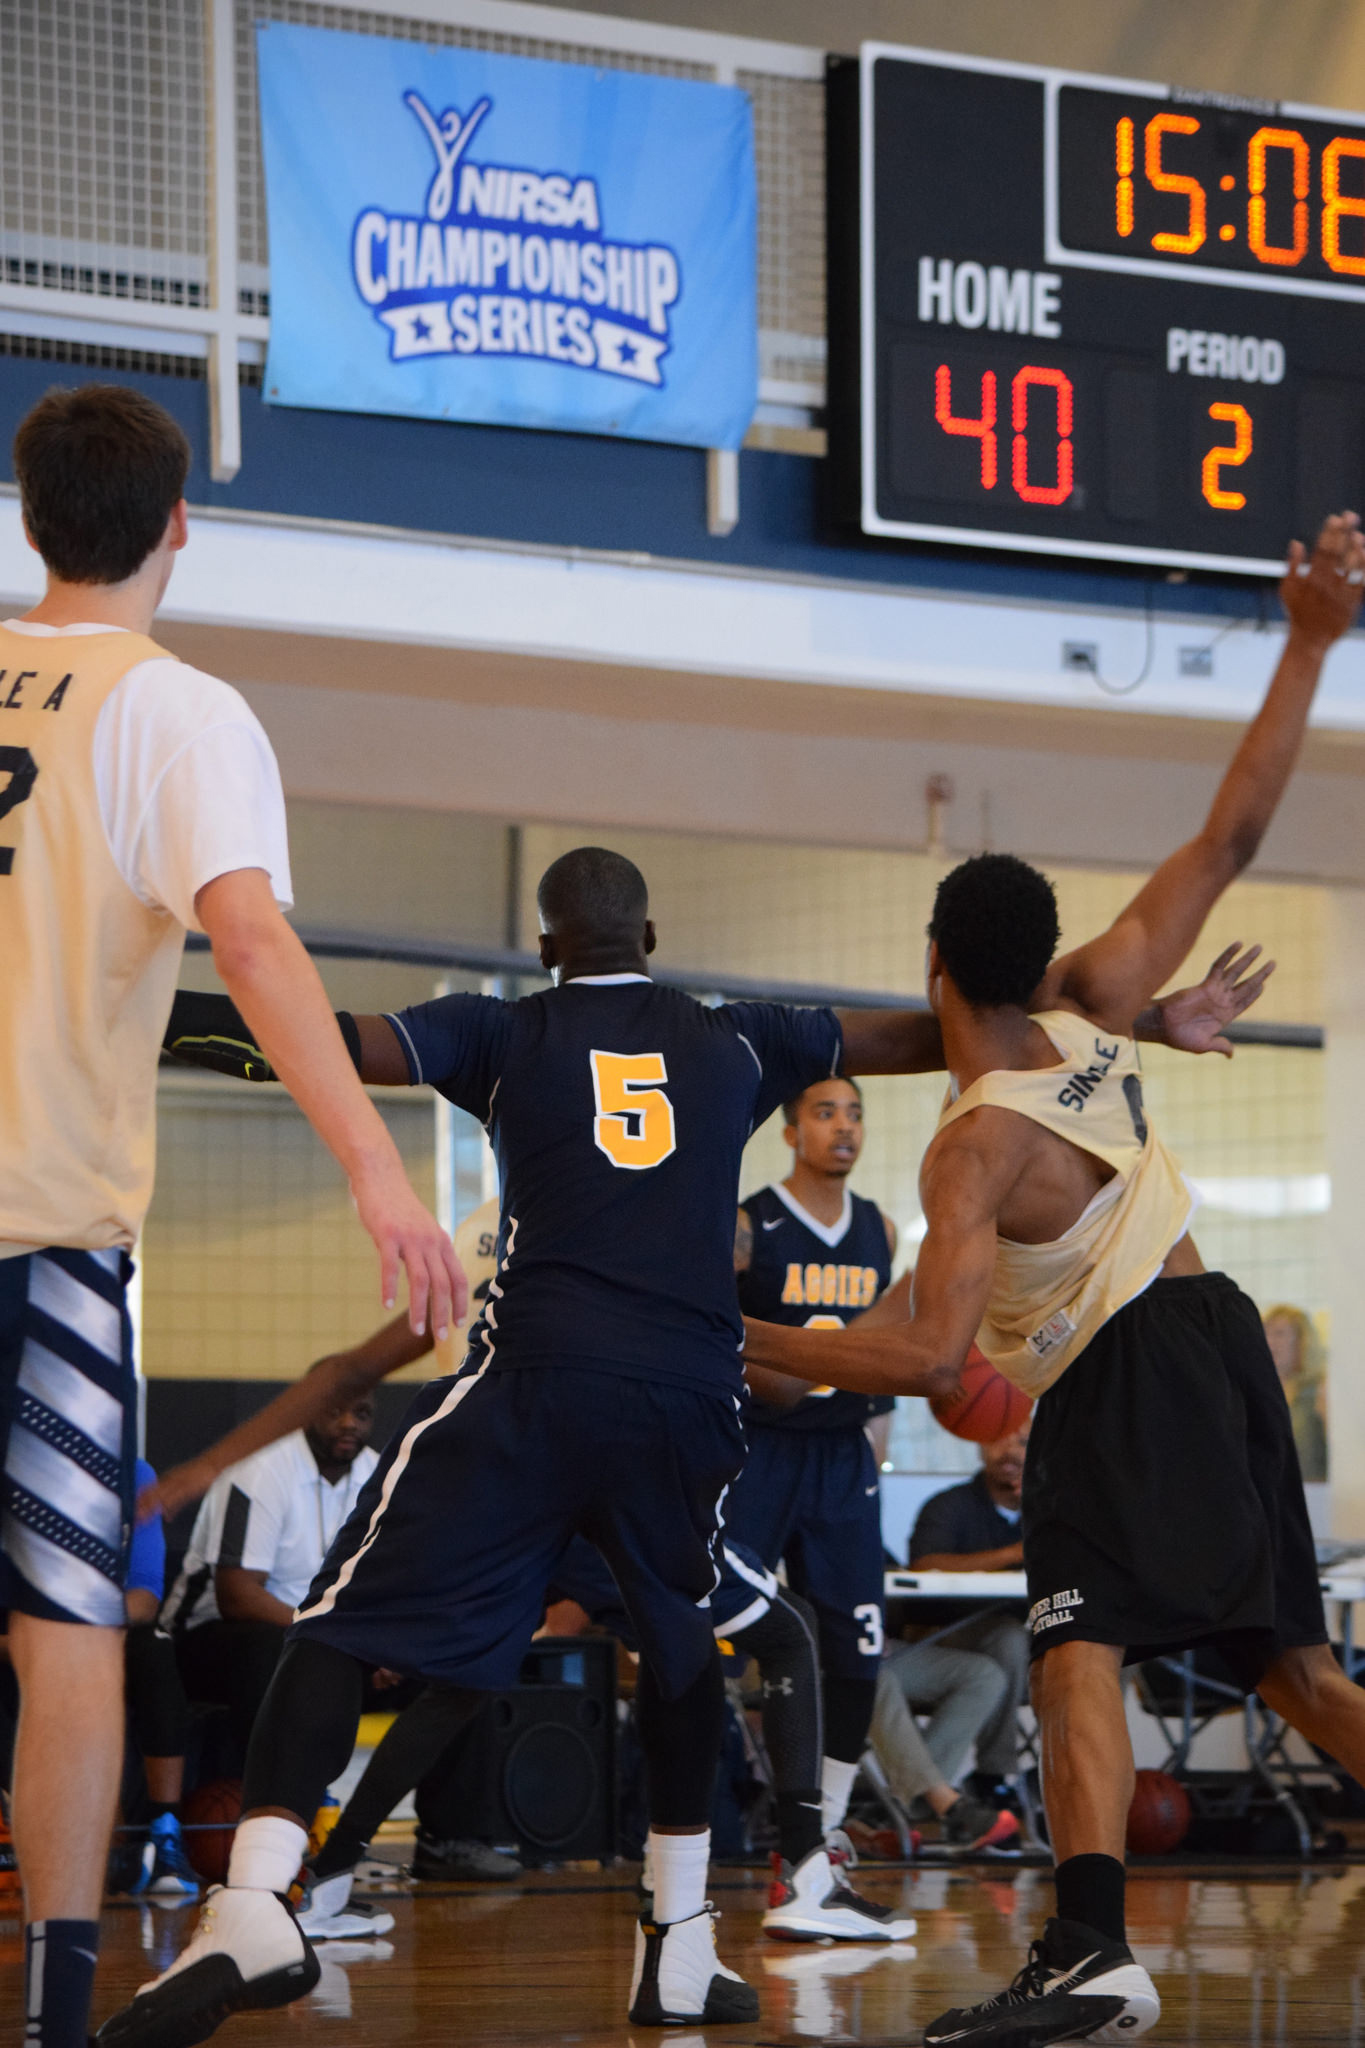 The Georgia Tech Allstars play in the championship game of the 2016 NIRSA Region II Basketball Championships.